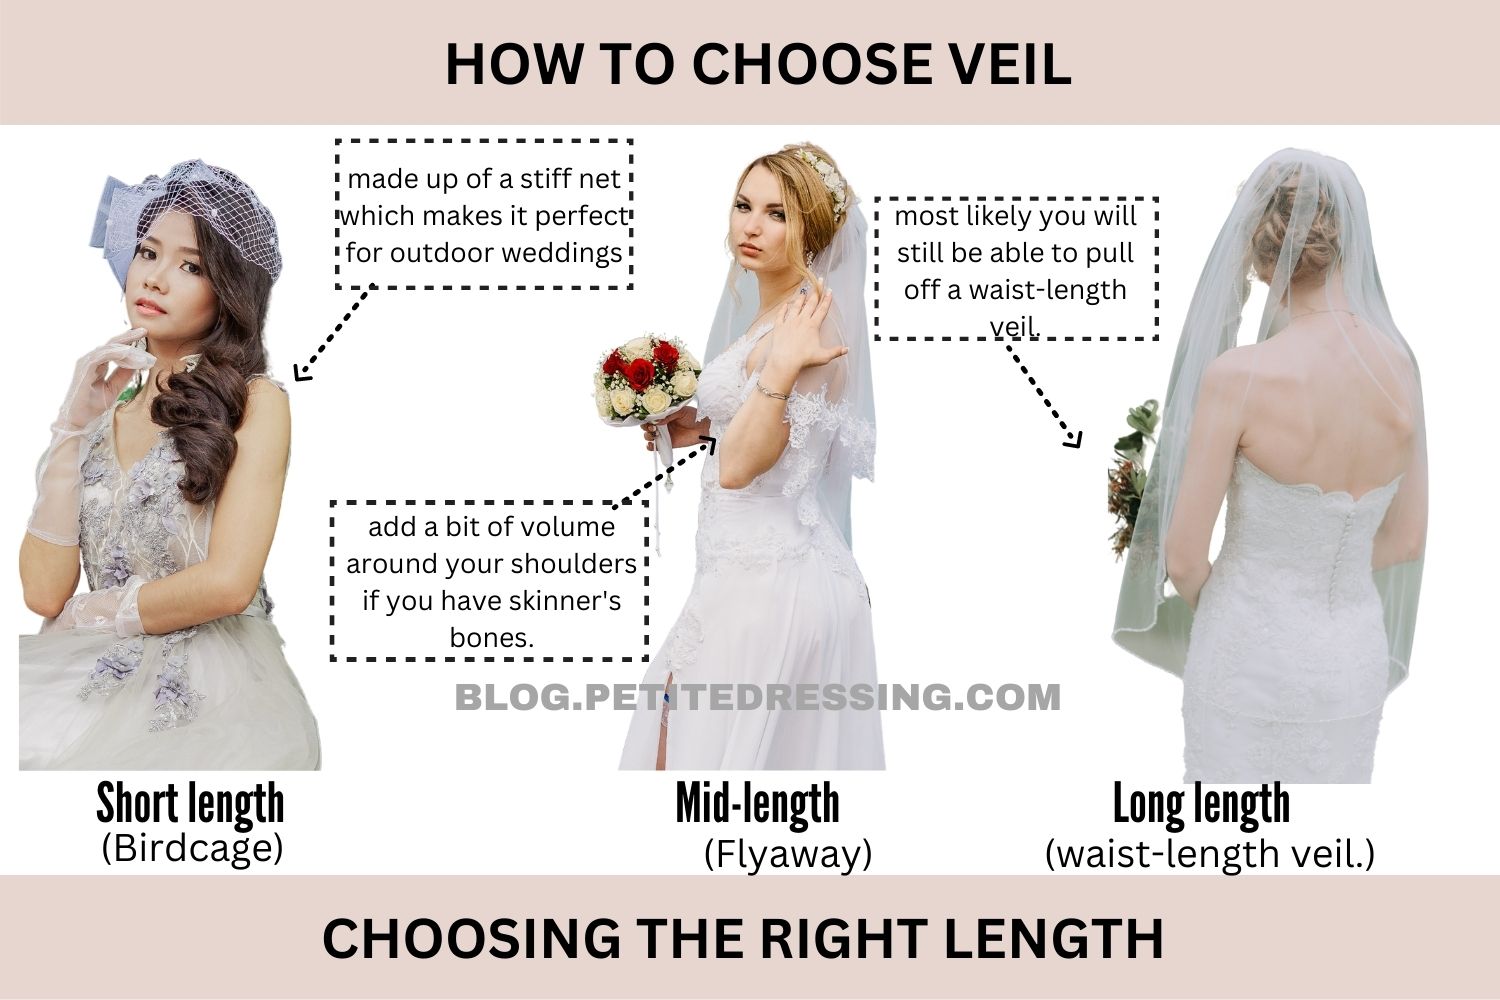 3 Considerations When Choosing The Right Types Of Wedding Veil